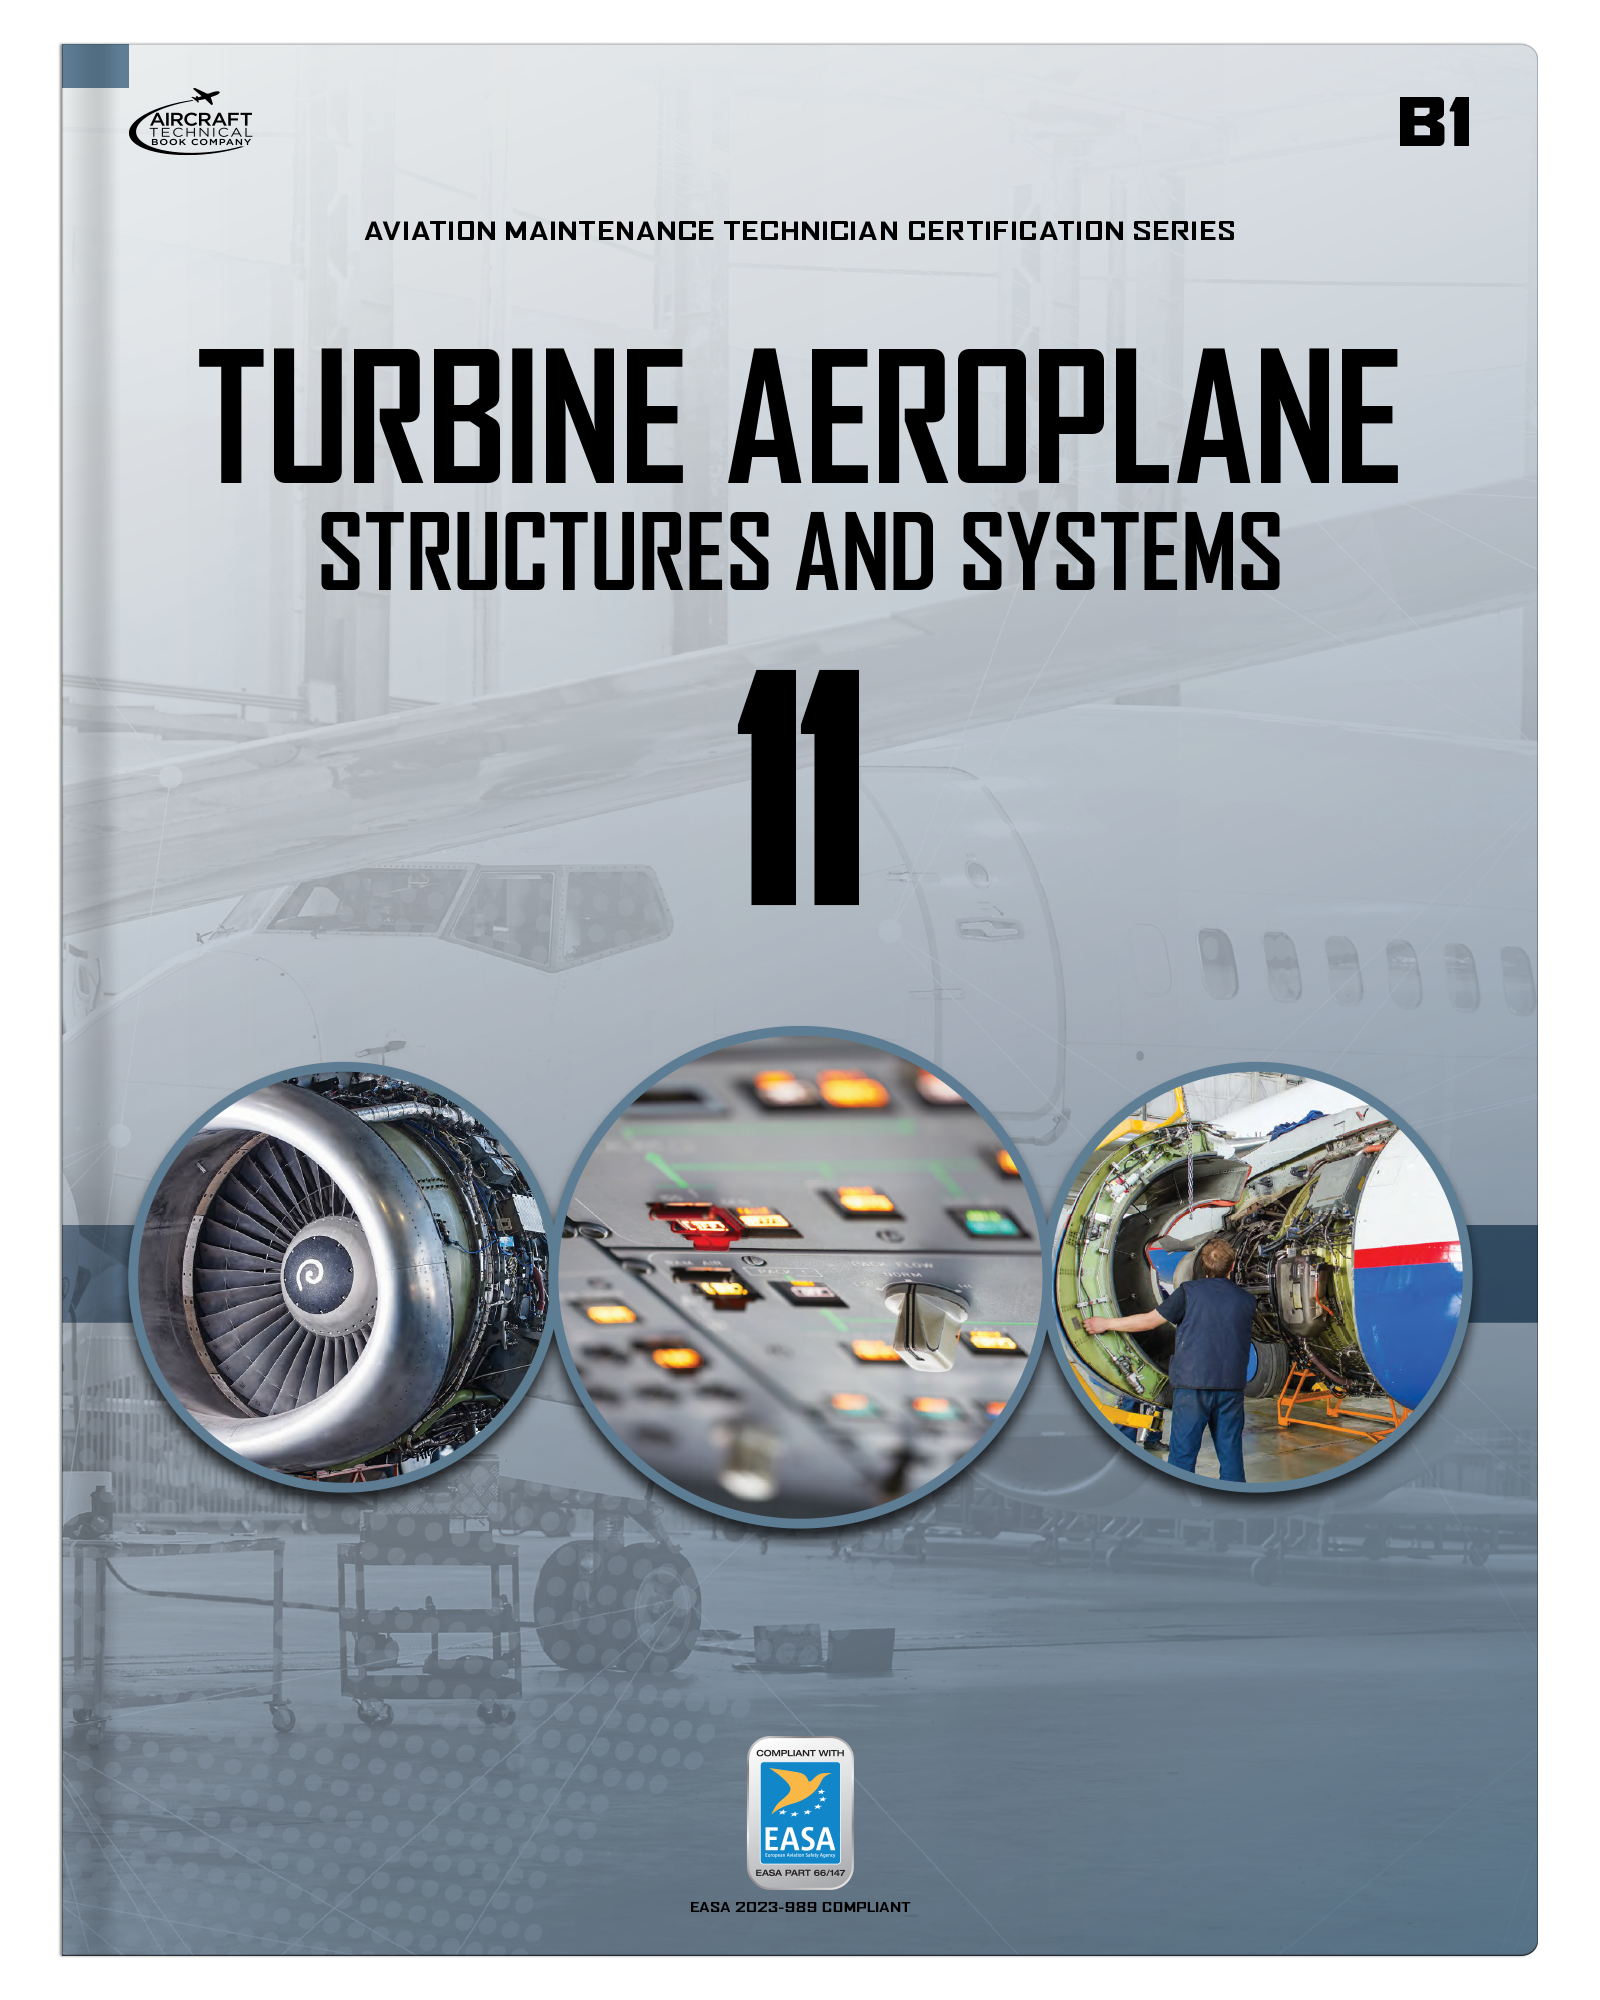 Turbine Aeroplane Structures and Systems: Module 11 (B1)